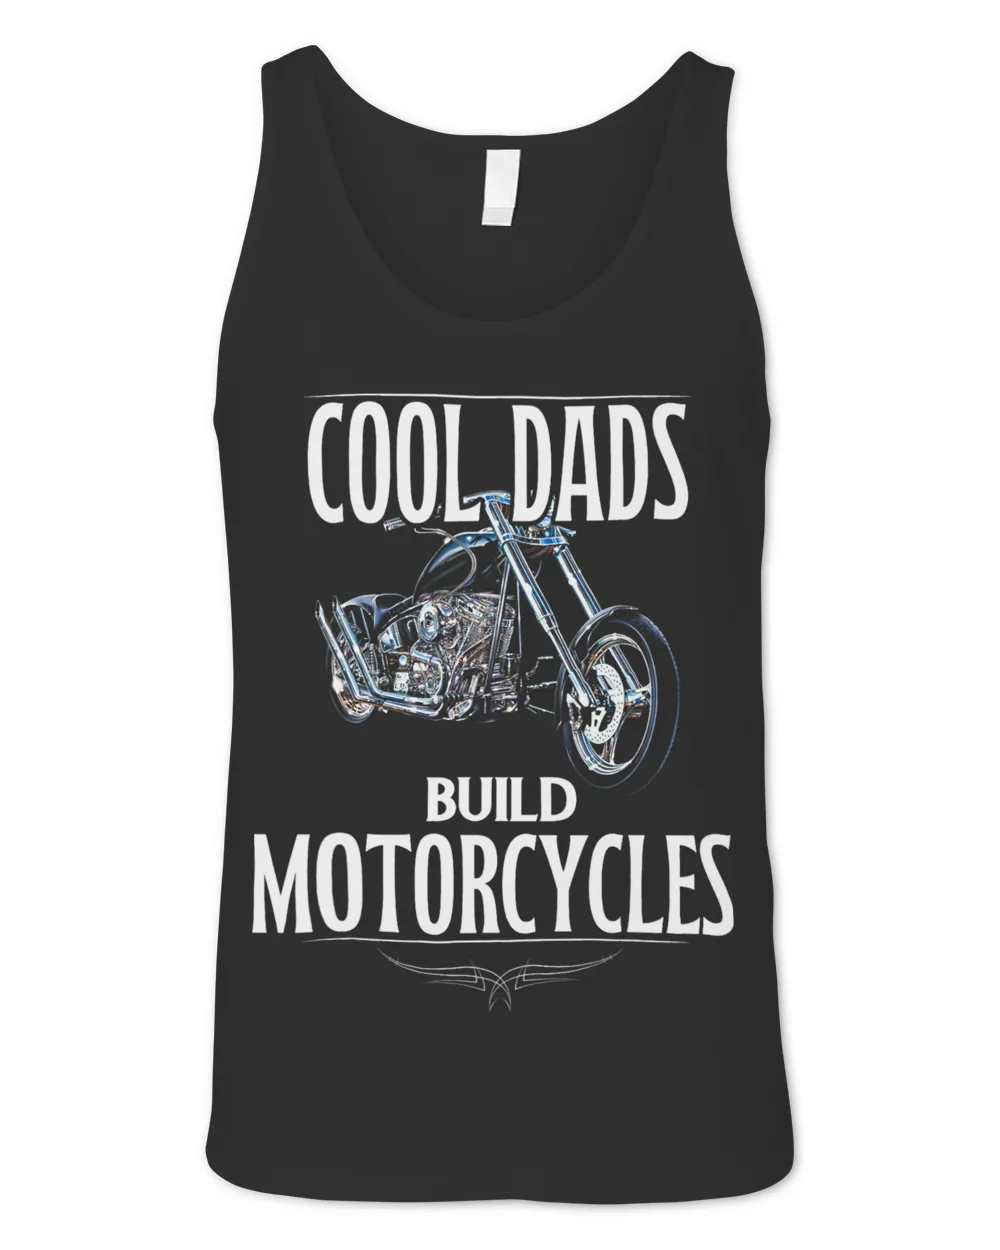 Cool Dads Build Motorcycles Funny Custom Motorcycle 3 66